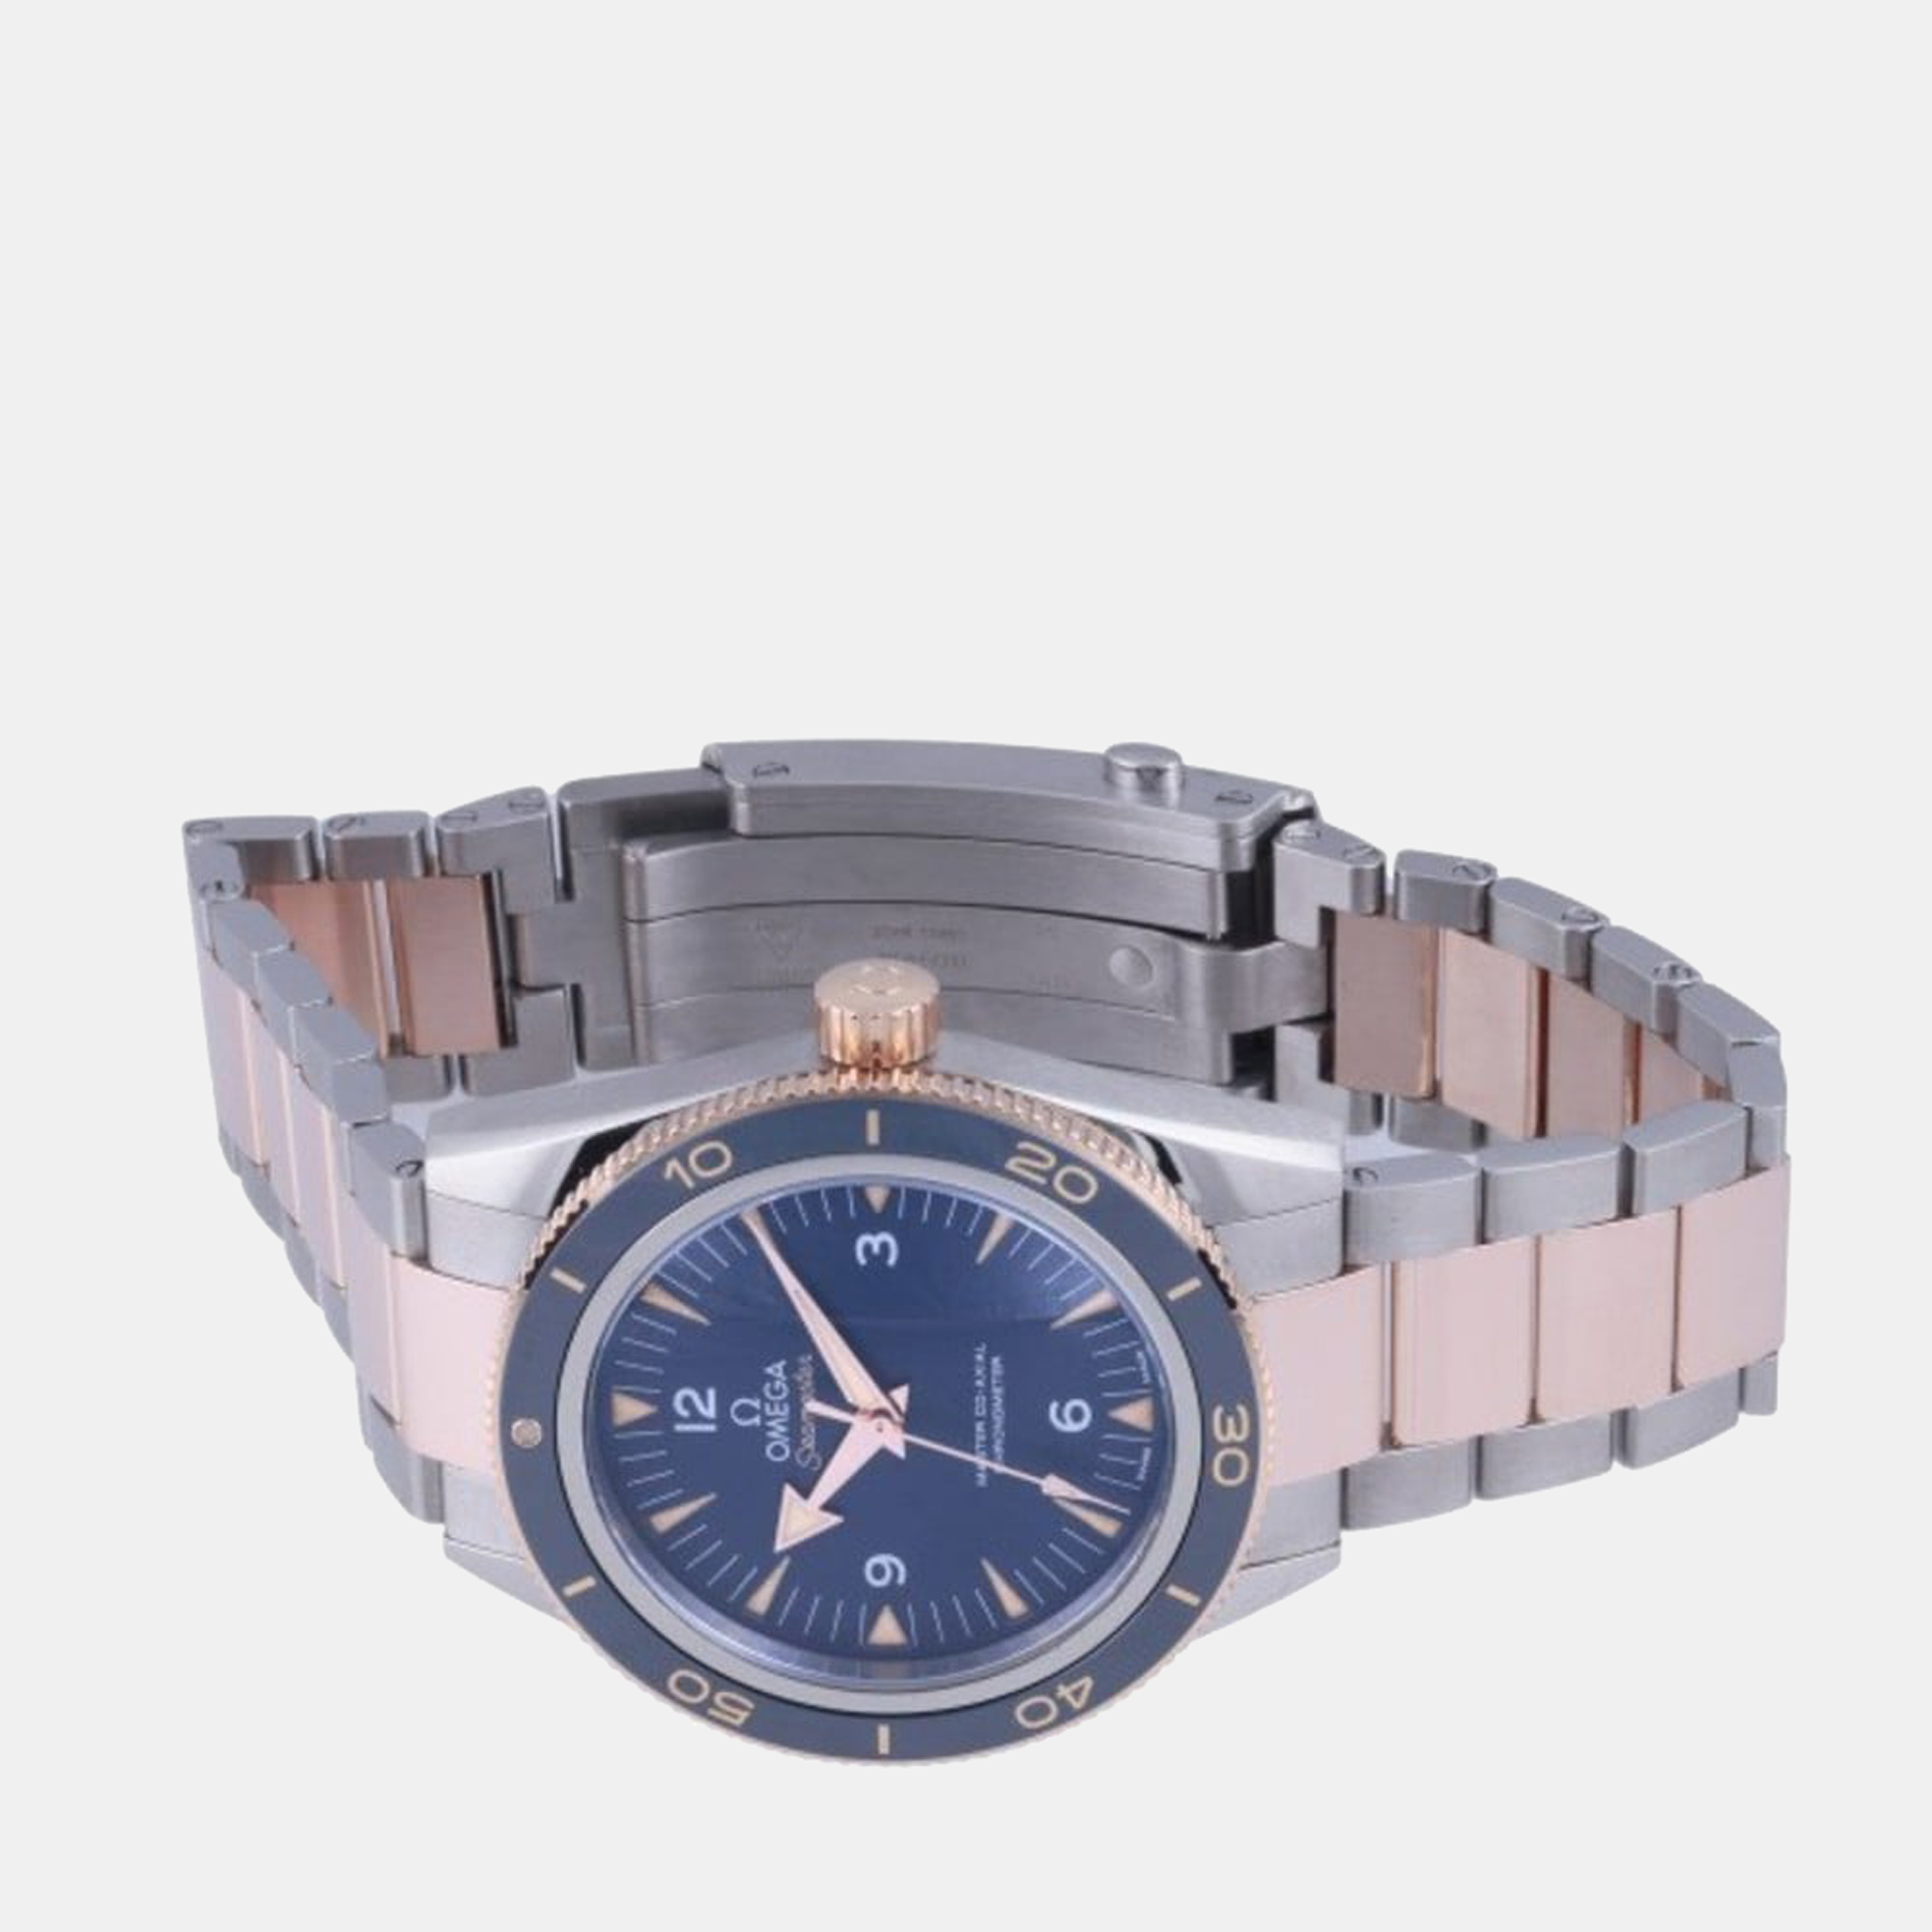 

Omega Blue 18k Rose Gold And Titanium Seamaster 233.60.41.21.03.001 Automatic Men's Wristwatch 41 mm